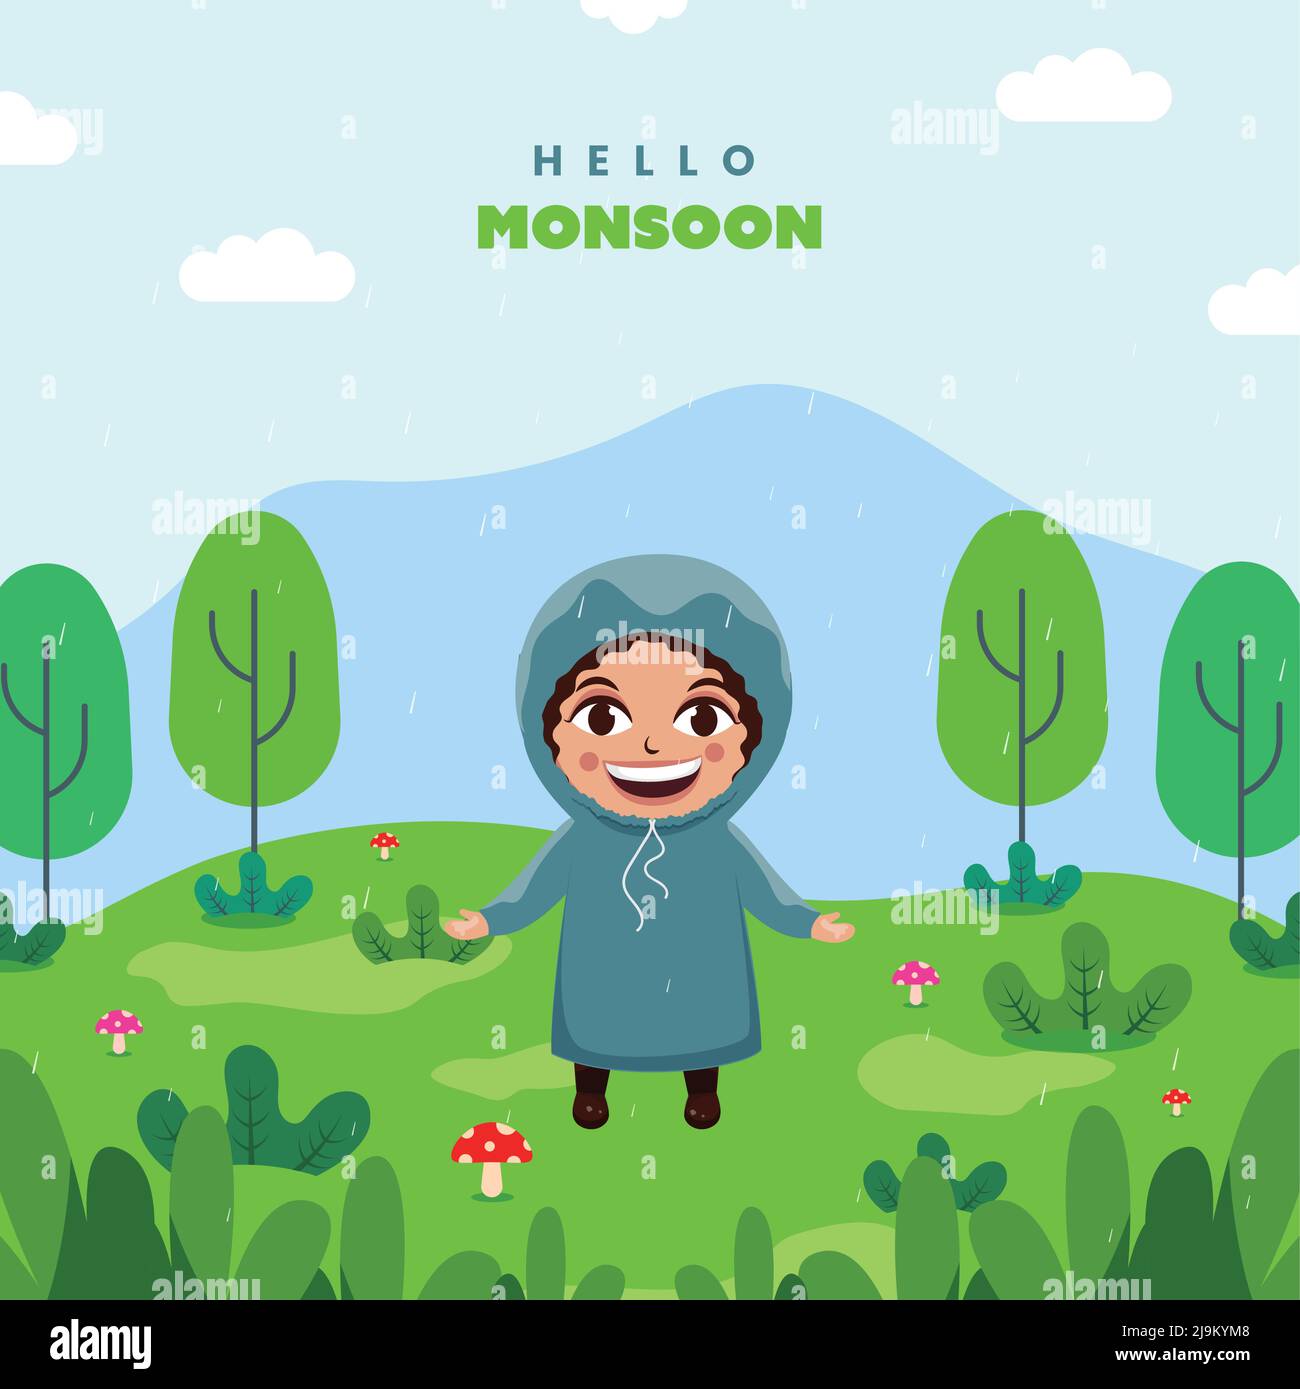 Hello Mushroom Concept With Cheerful Boy Wearing Raincoat On Natural Rainfall Background. Stock Vector